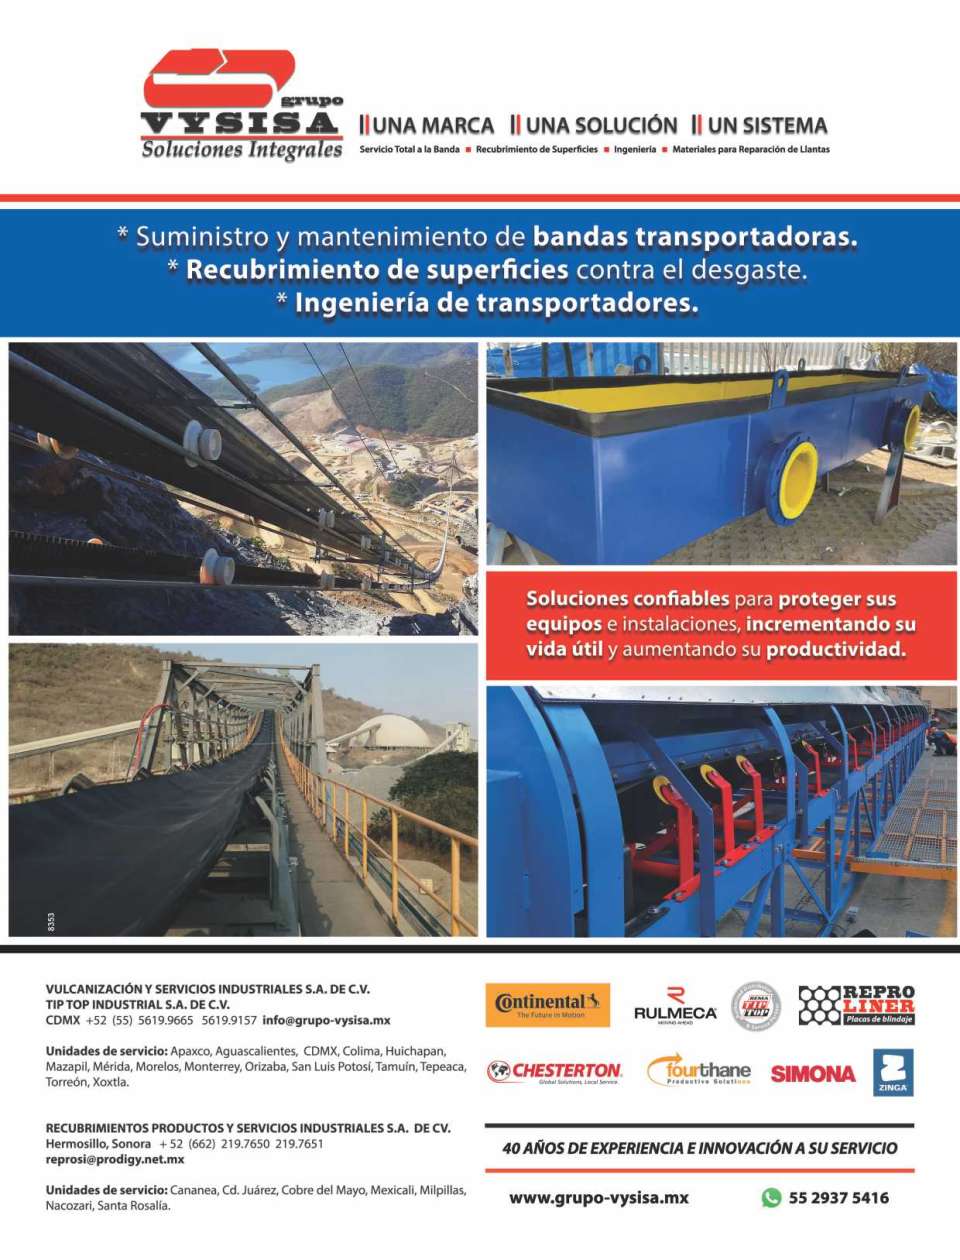 Supply and Maintenance of Conveyor Belts. Surface coatings against wear. Conveyor Engineering. Continental, Rulmeca, Reproliner, Chesterton, Simona.